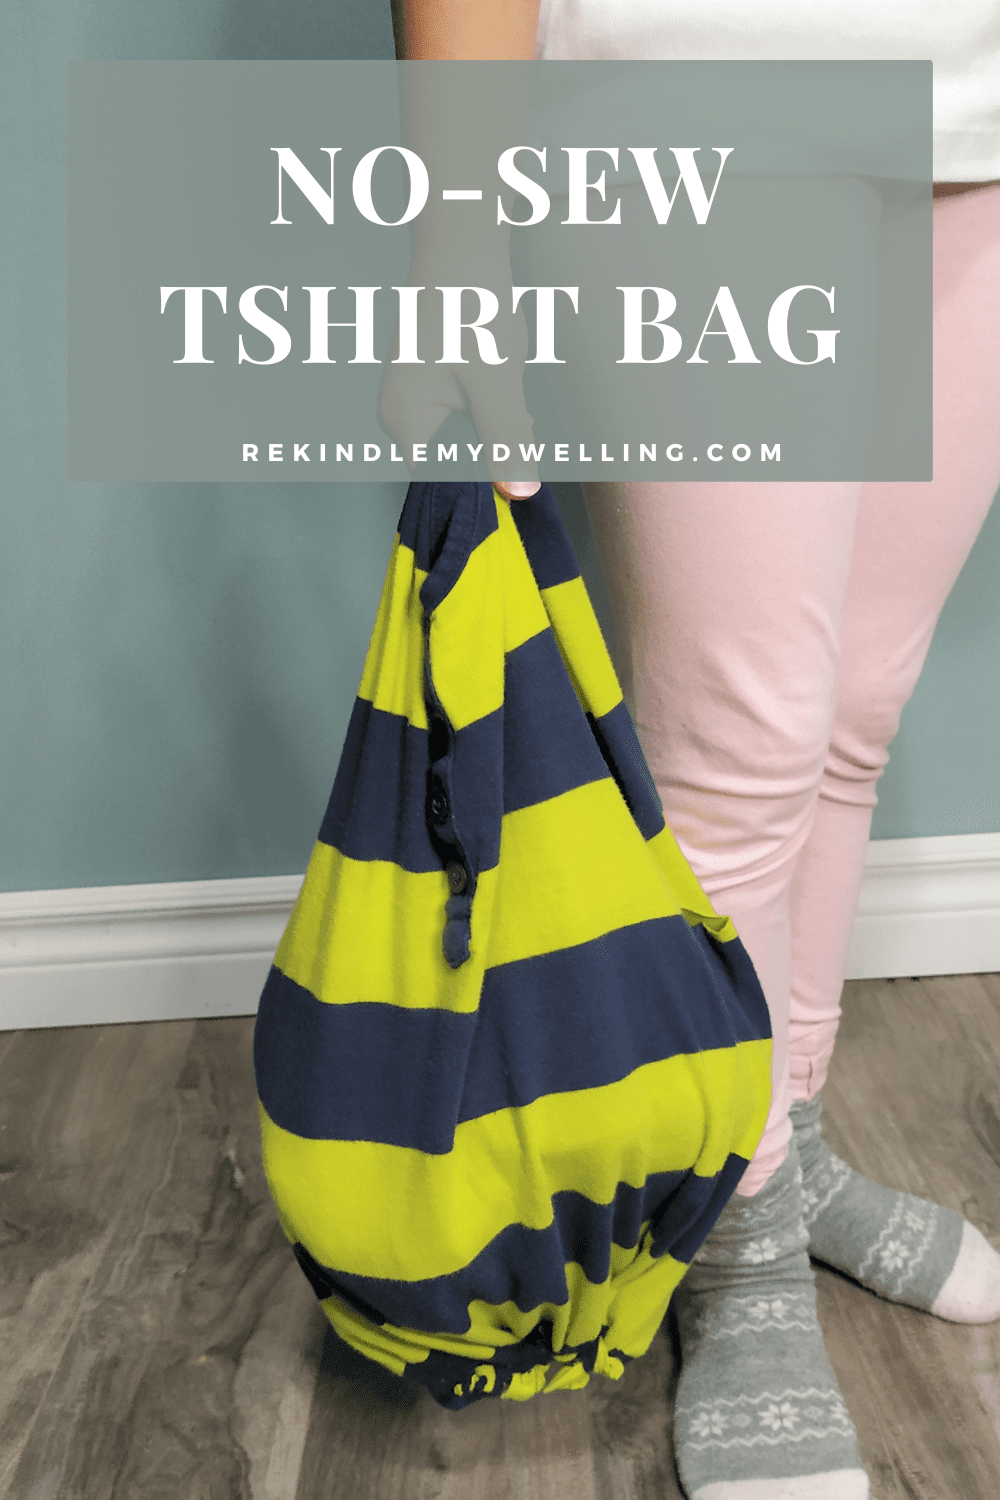 Child holding a no-sew tshirt bag with text overlay.